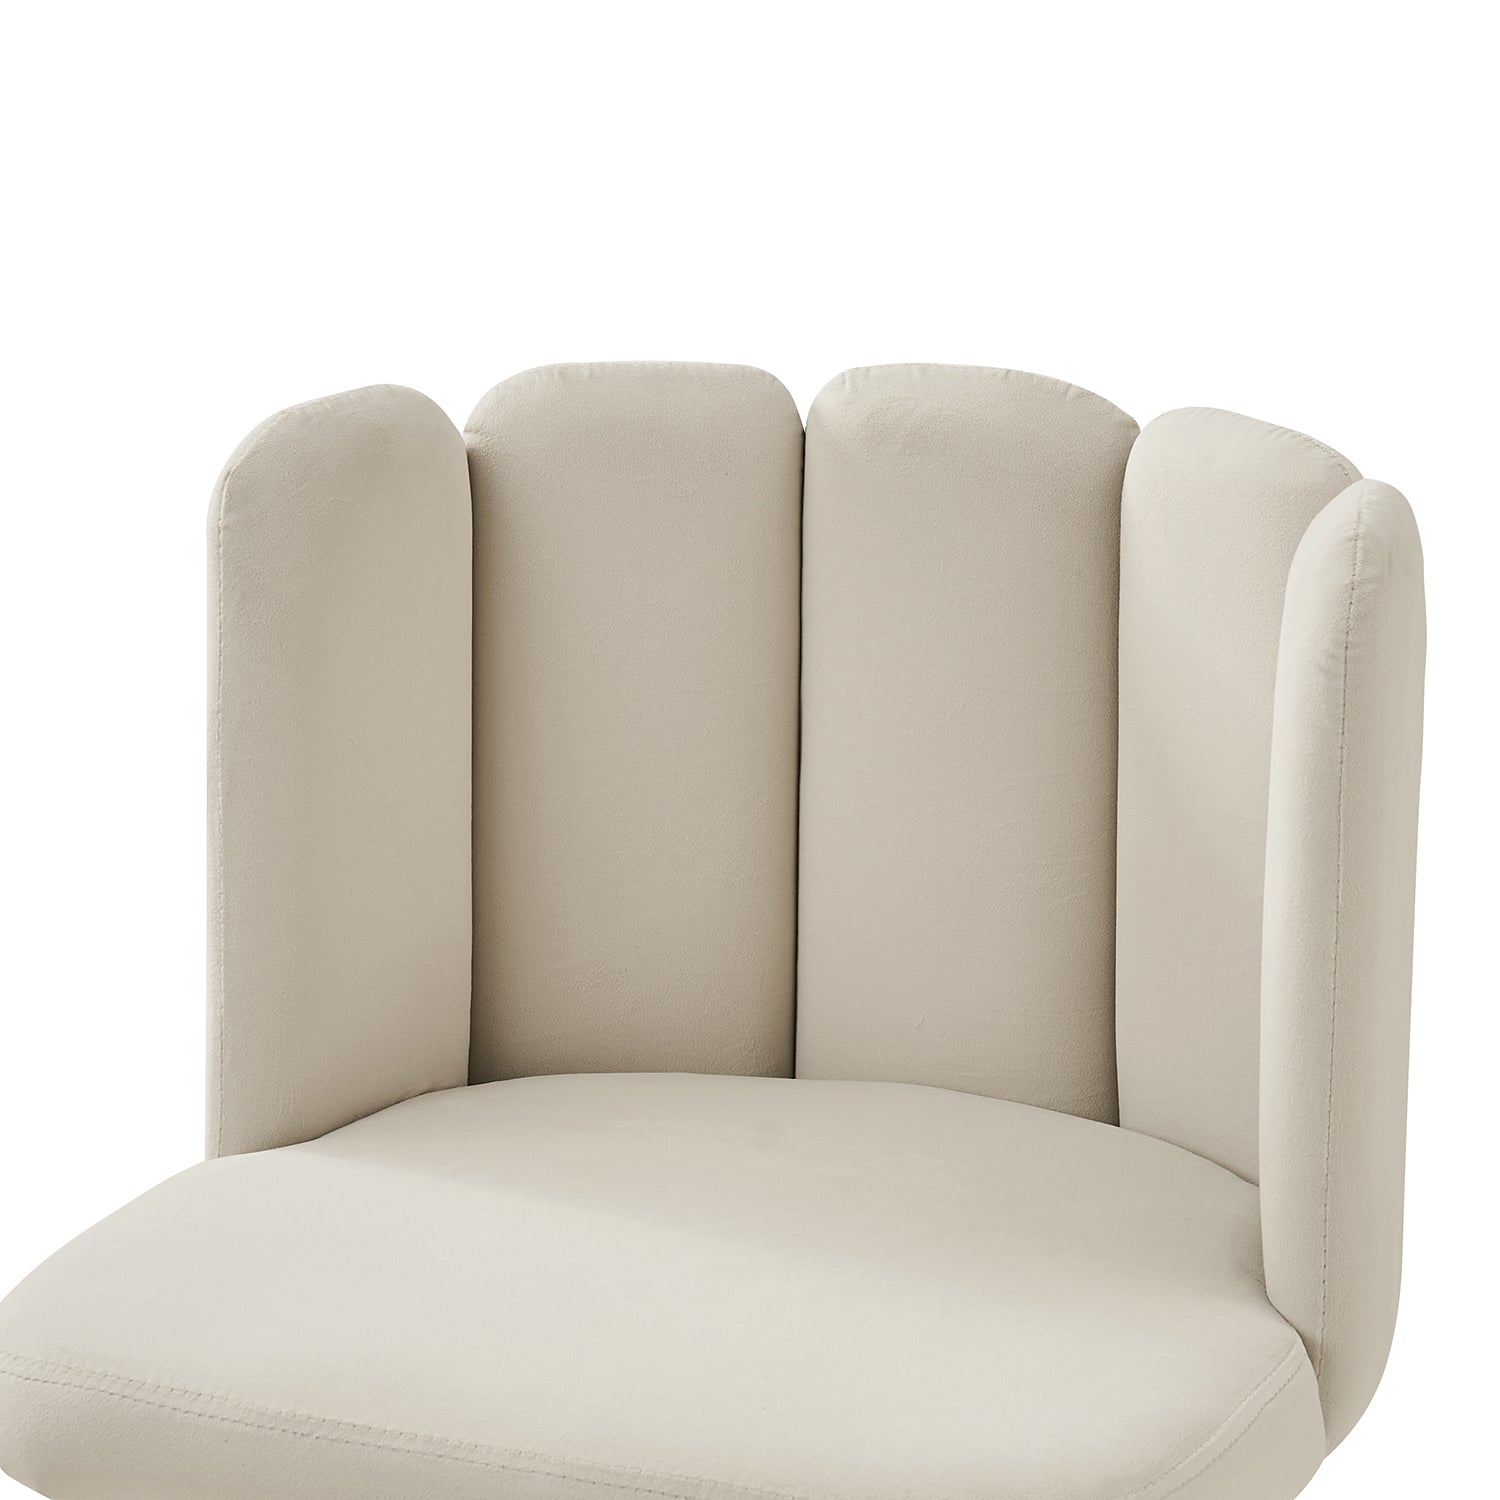 Angel Side Chair (Set of 2)